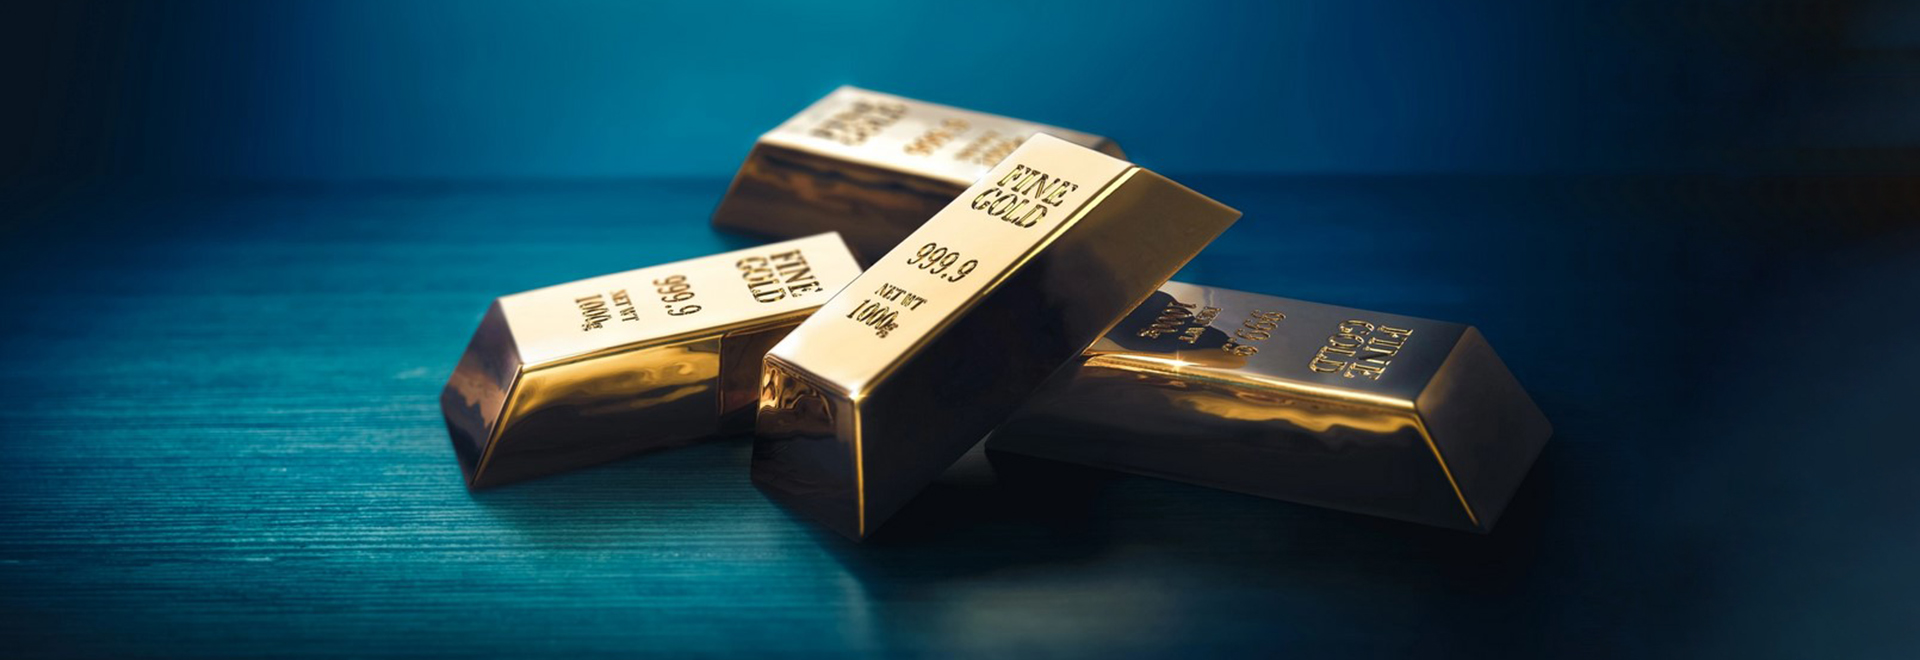 Gold Price Experiences a Significant Pullback